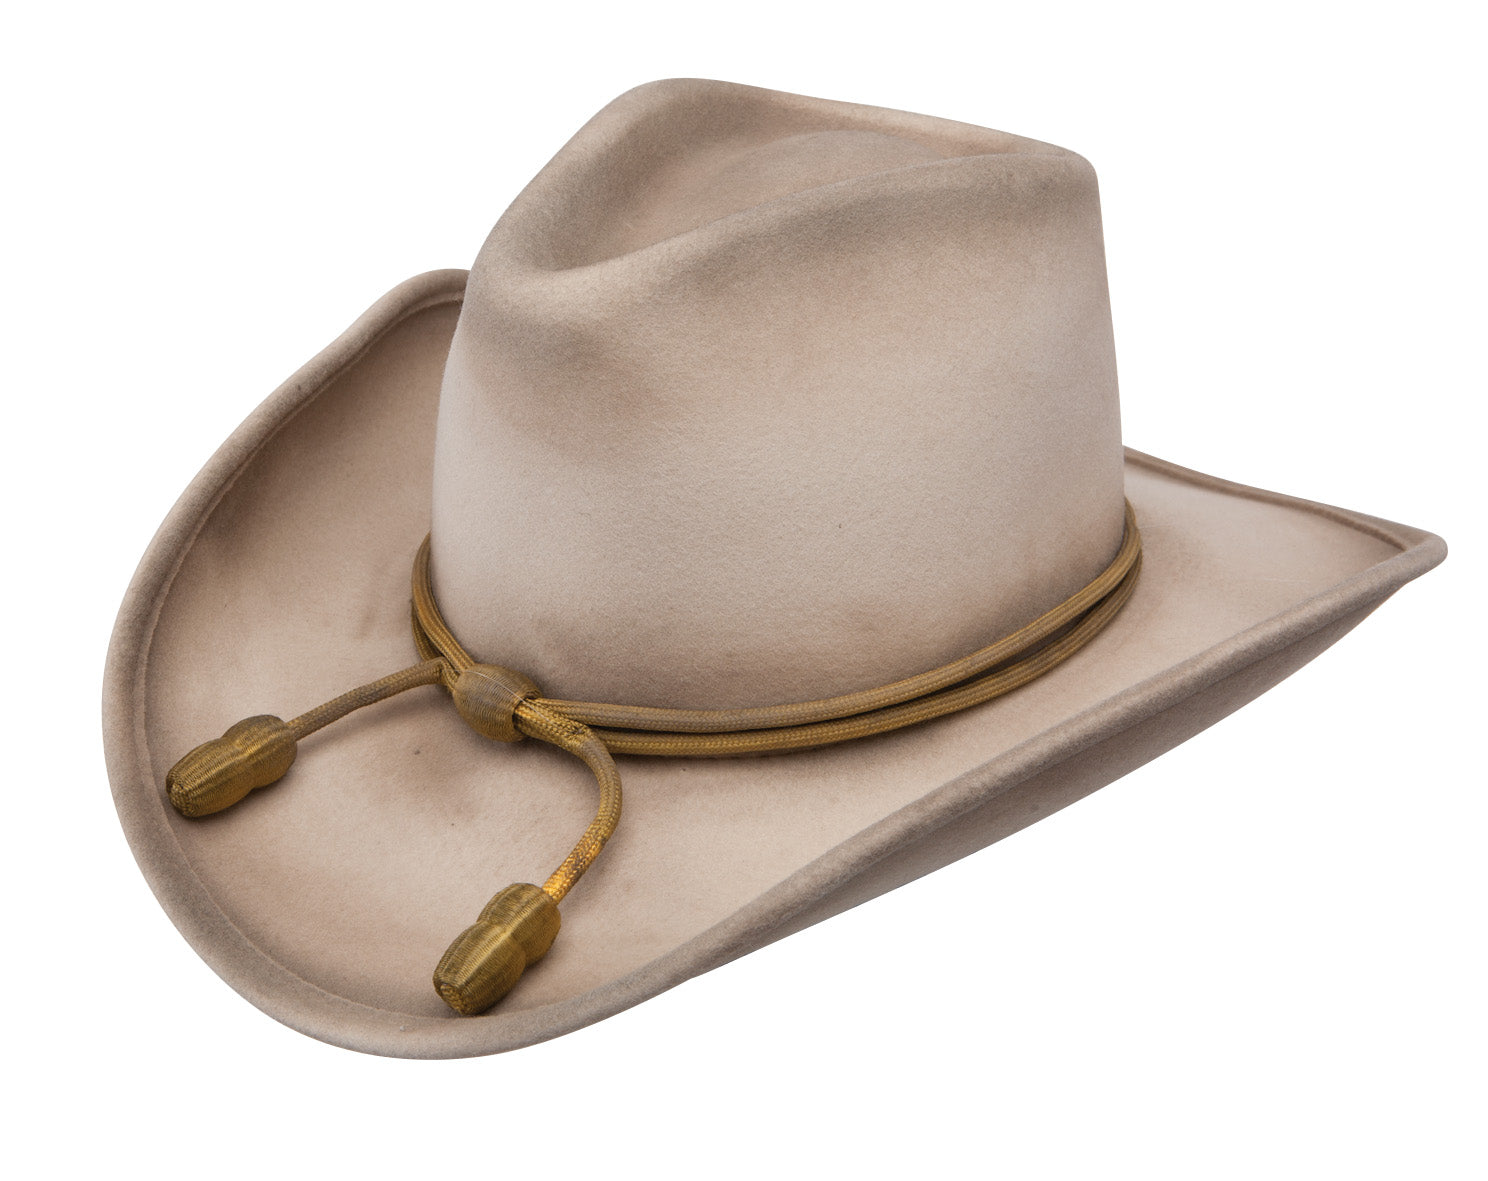 Stetson Gus Crushable Wool Cowboy Hat - Silverbelly